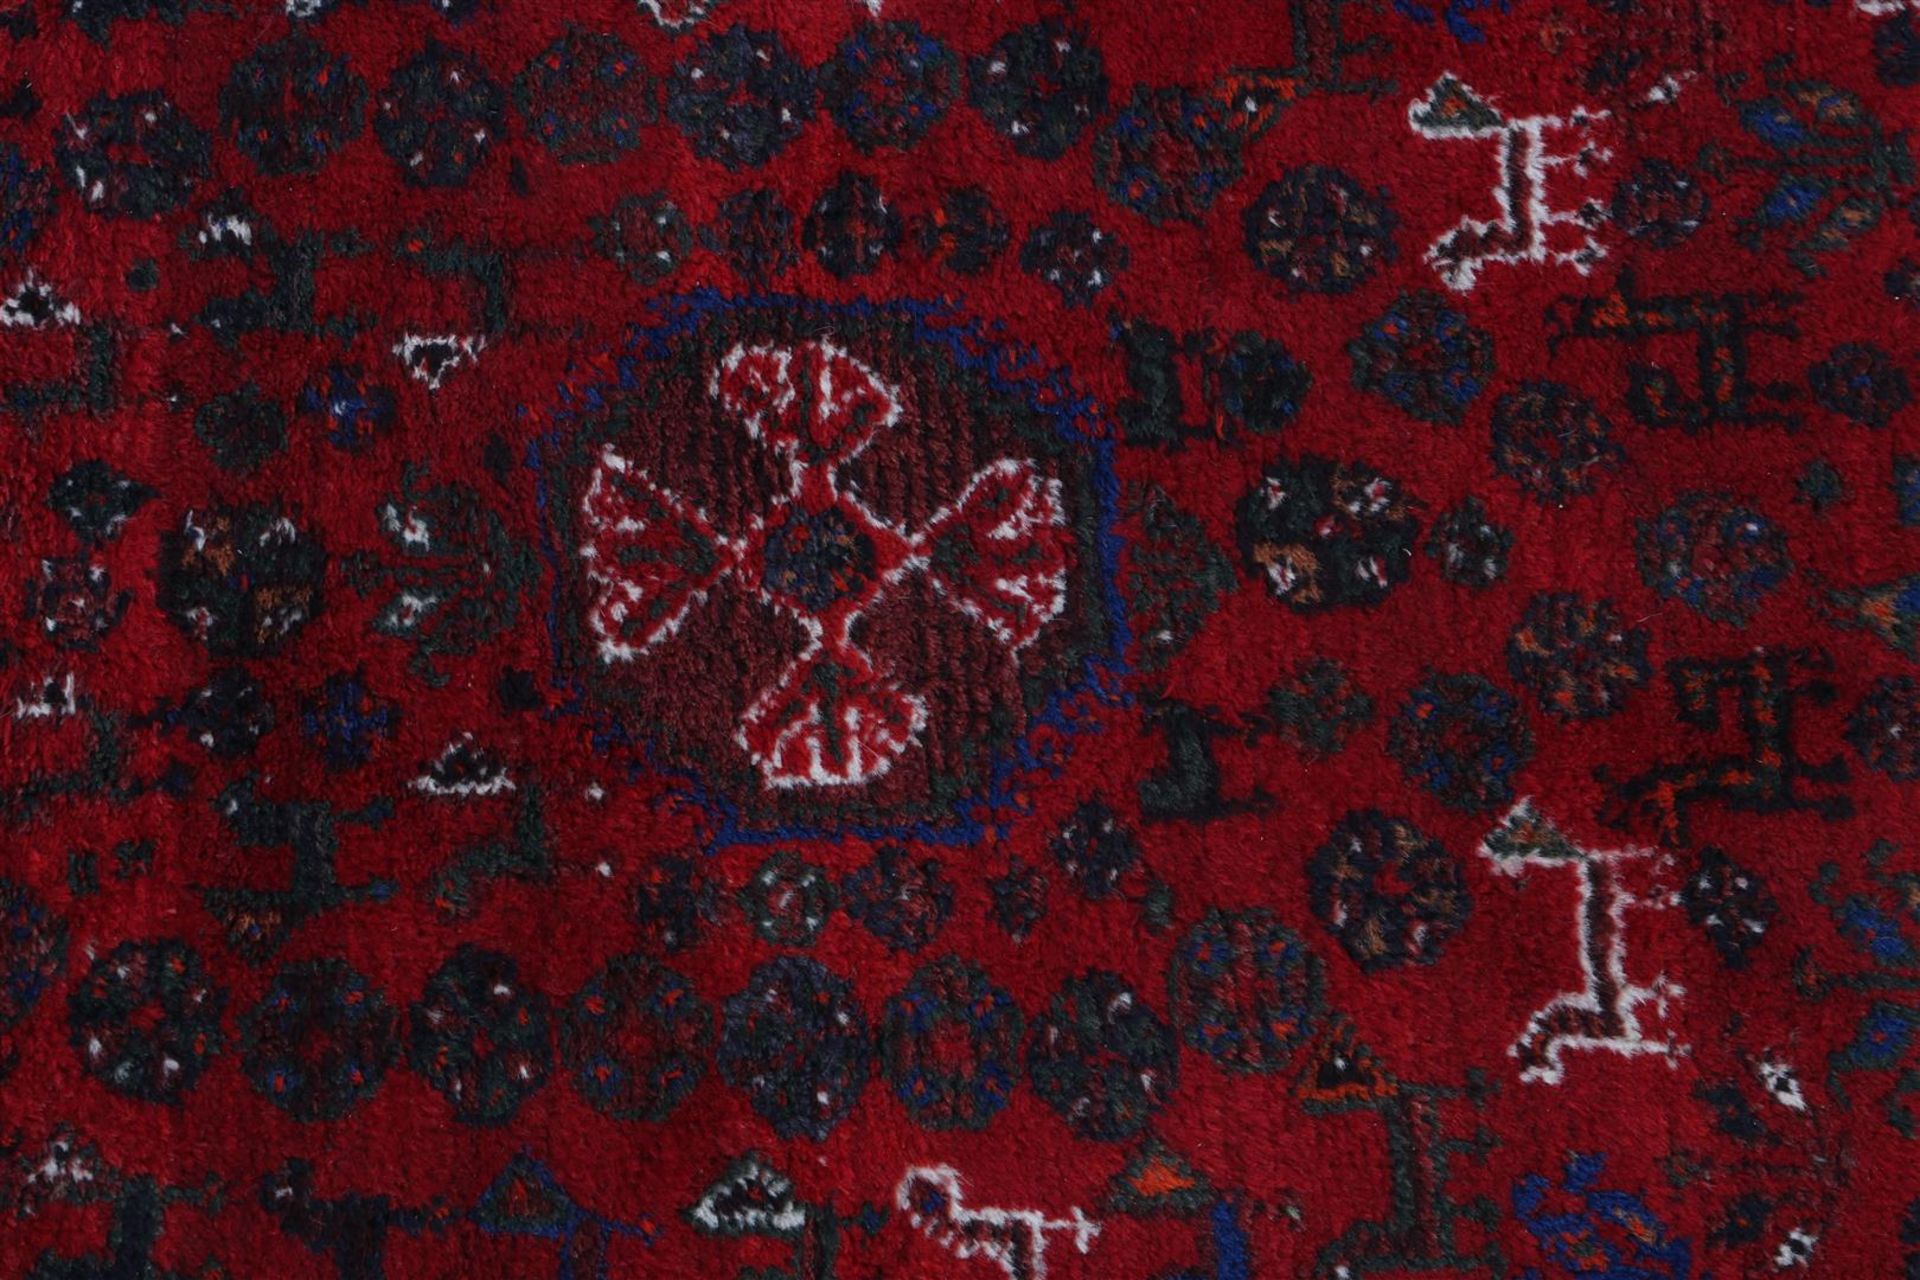 Shiraz hand-knotted carpet - Image 4 of 4